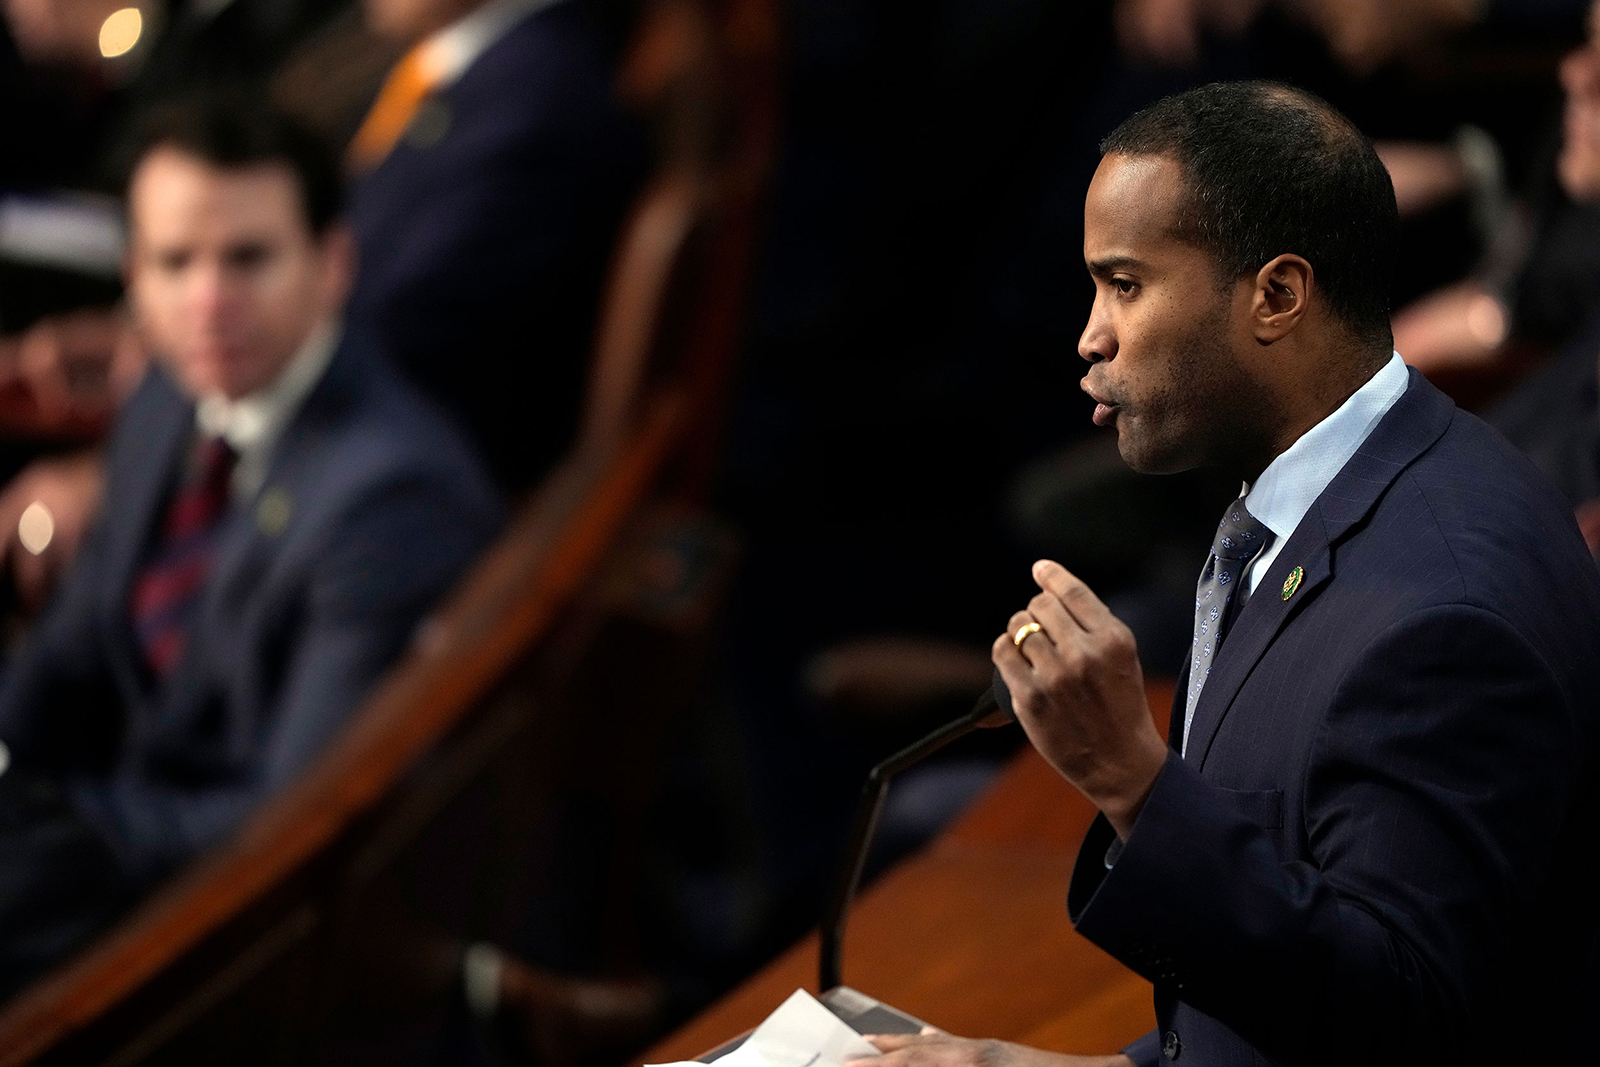 US Rep. John James, a Republican from Michigan, nominated McCarthy for the seventh vote. James made a plea for unity in his nomination speech, saying, the "issues that divide us today are much less severe that they were in 1856; in fact, there's far more that unite us, than divide us, regardless of our political party of ideology."